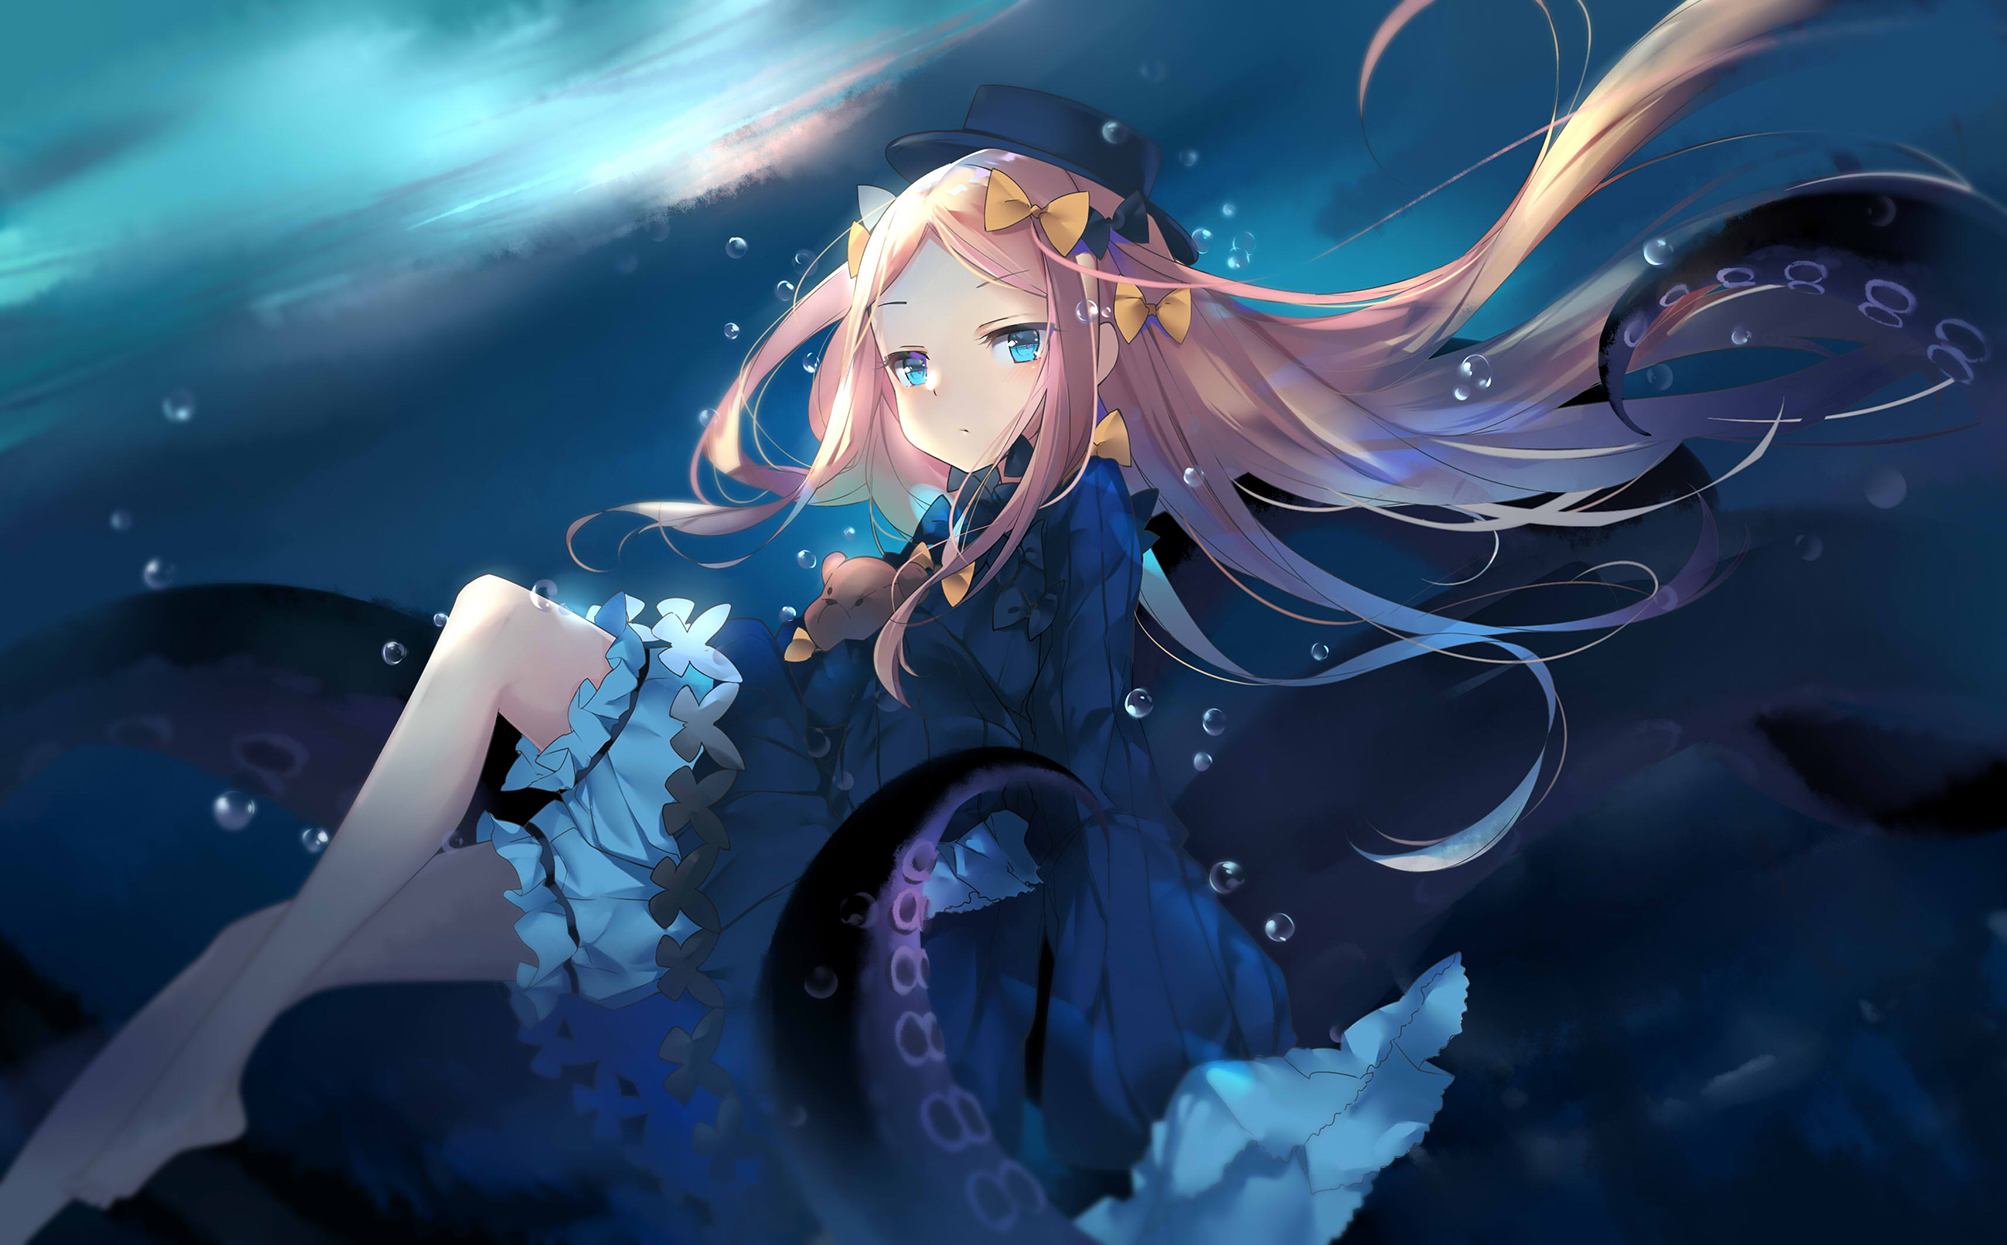 Foreigner (Abigail Williams) Grand Order Anime Image Board